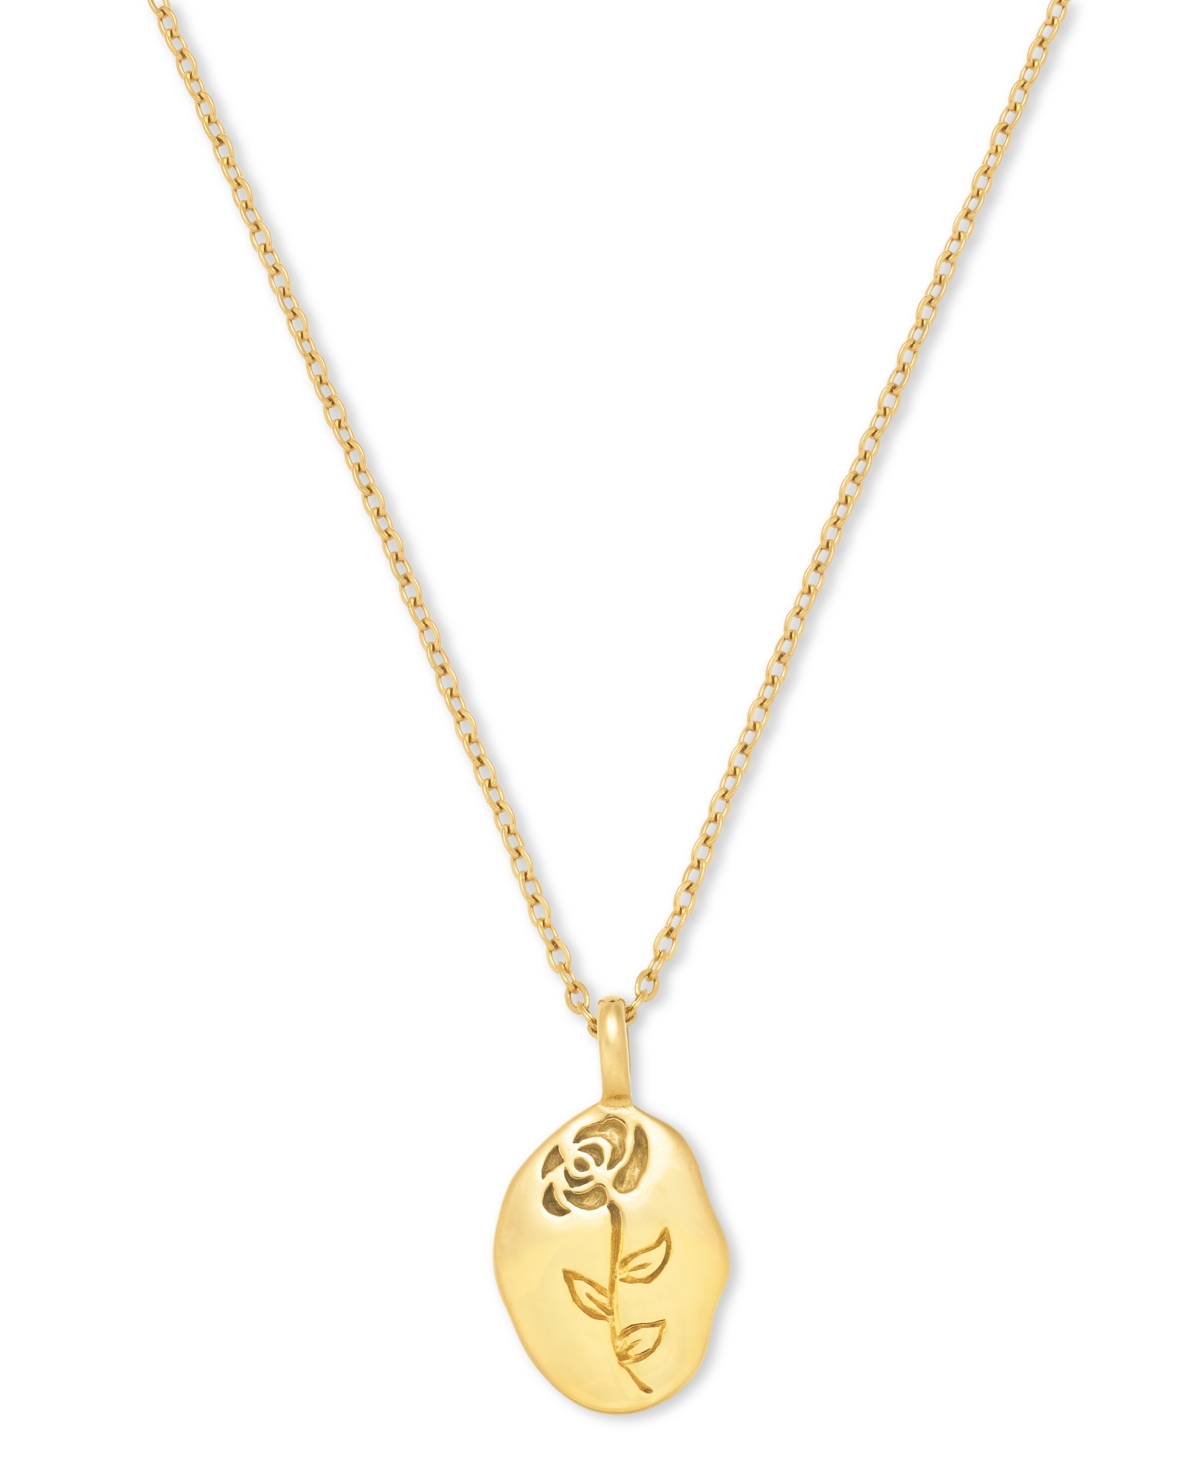 Lola Ade 18k Gold-plated Stainless Steel Flower-etched Pendant Necklace, 20" + 2-1/2" Extender